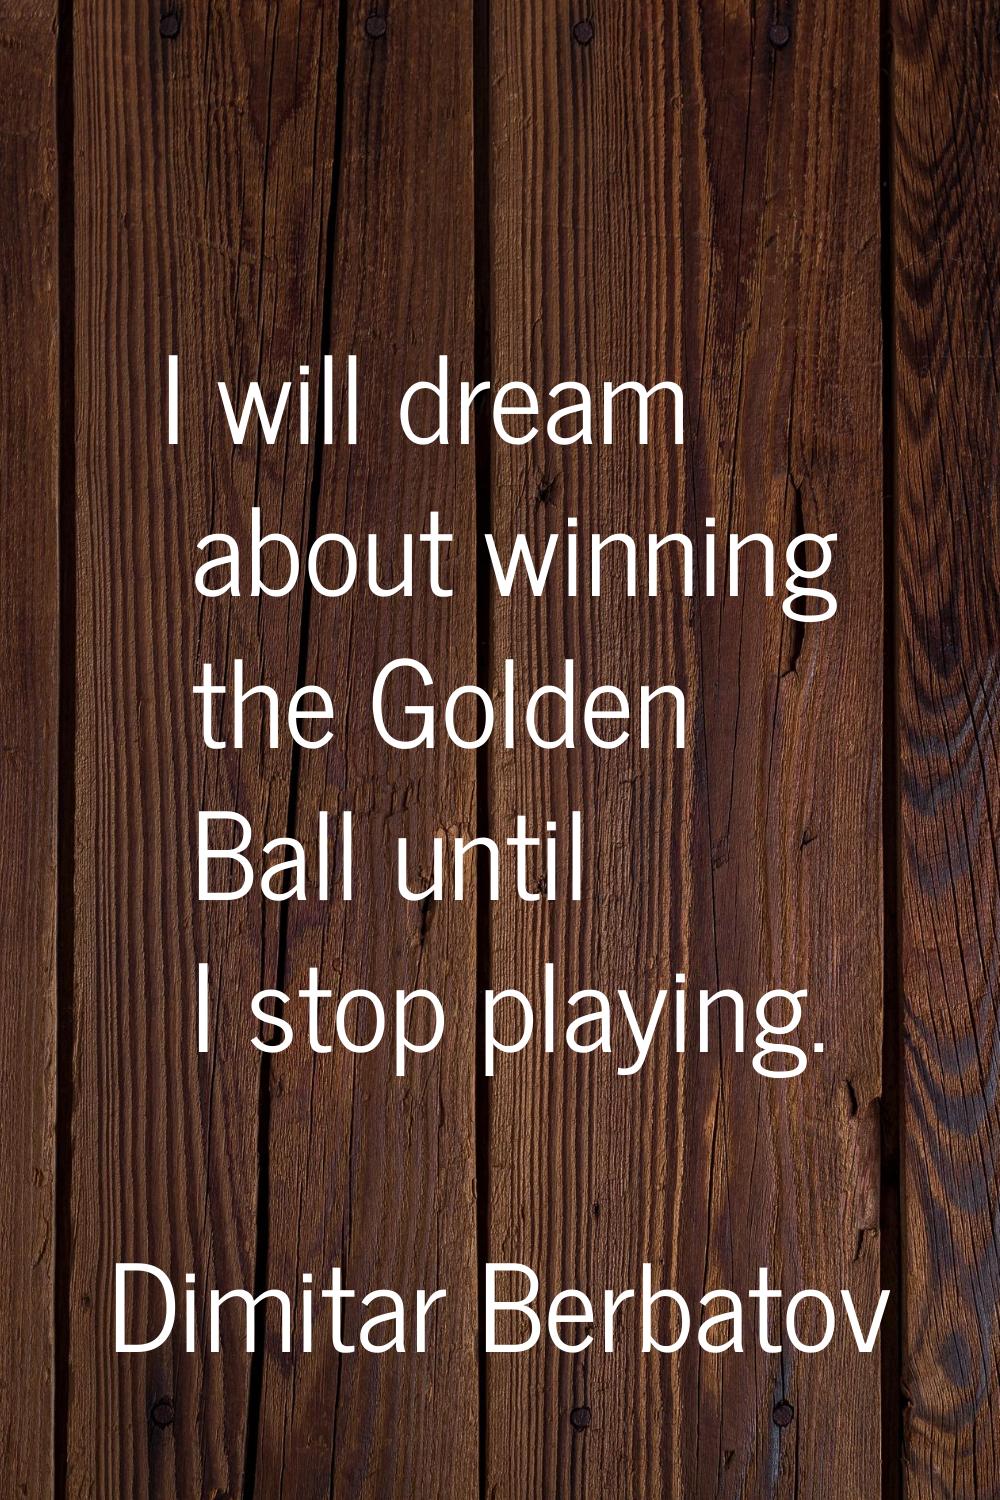 I will dream about winning the Golden Ball until I stop playing.